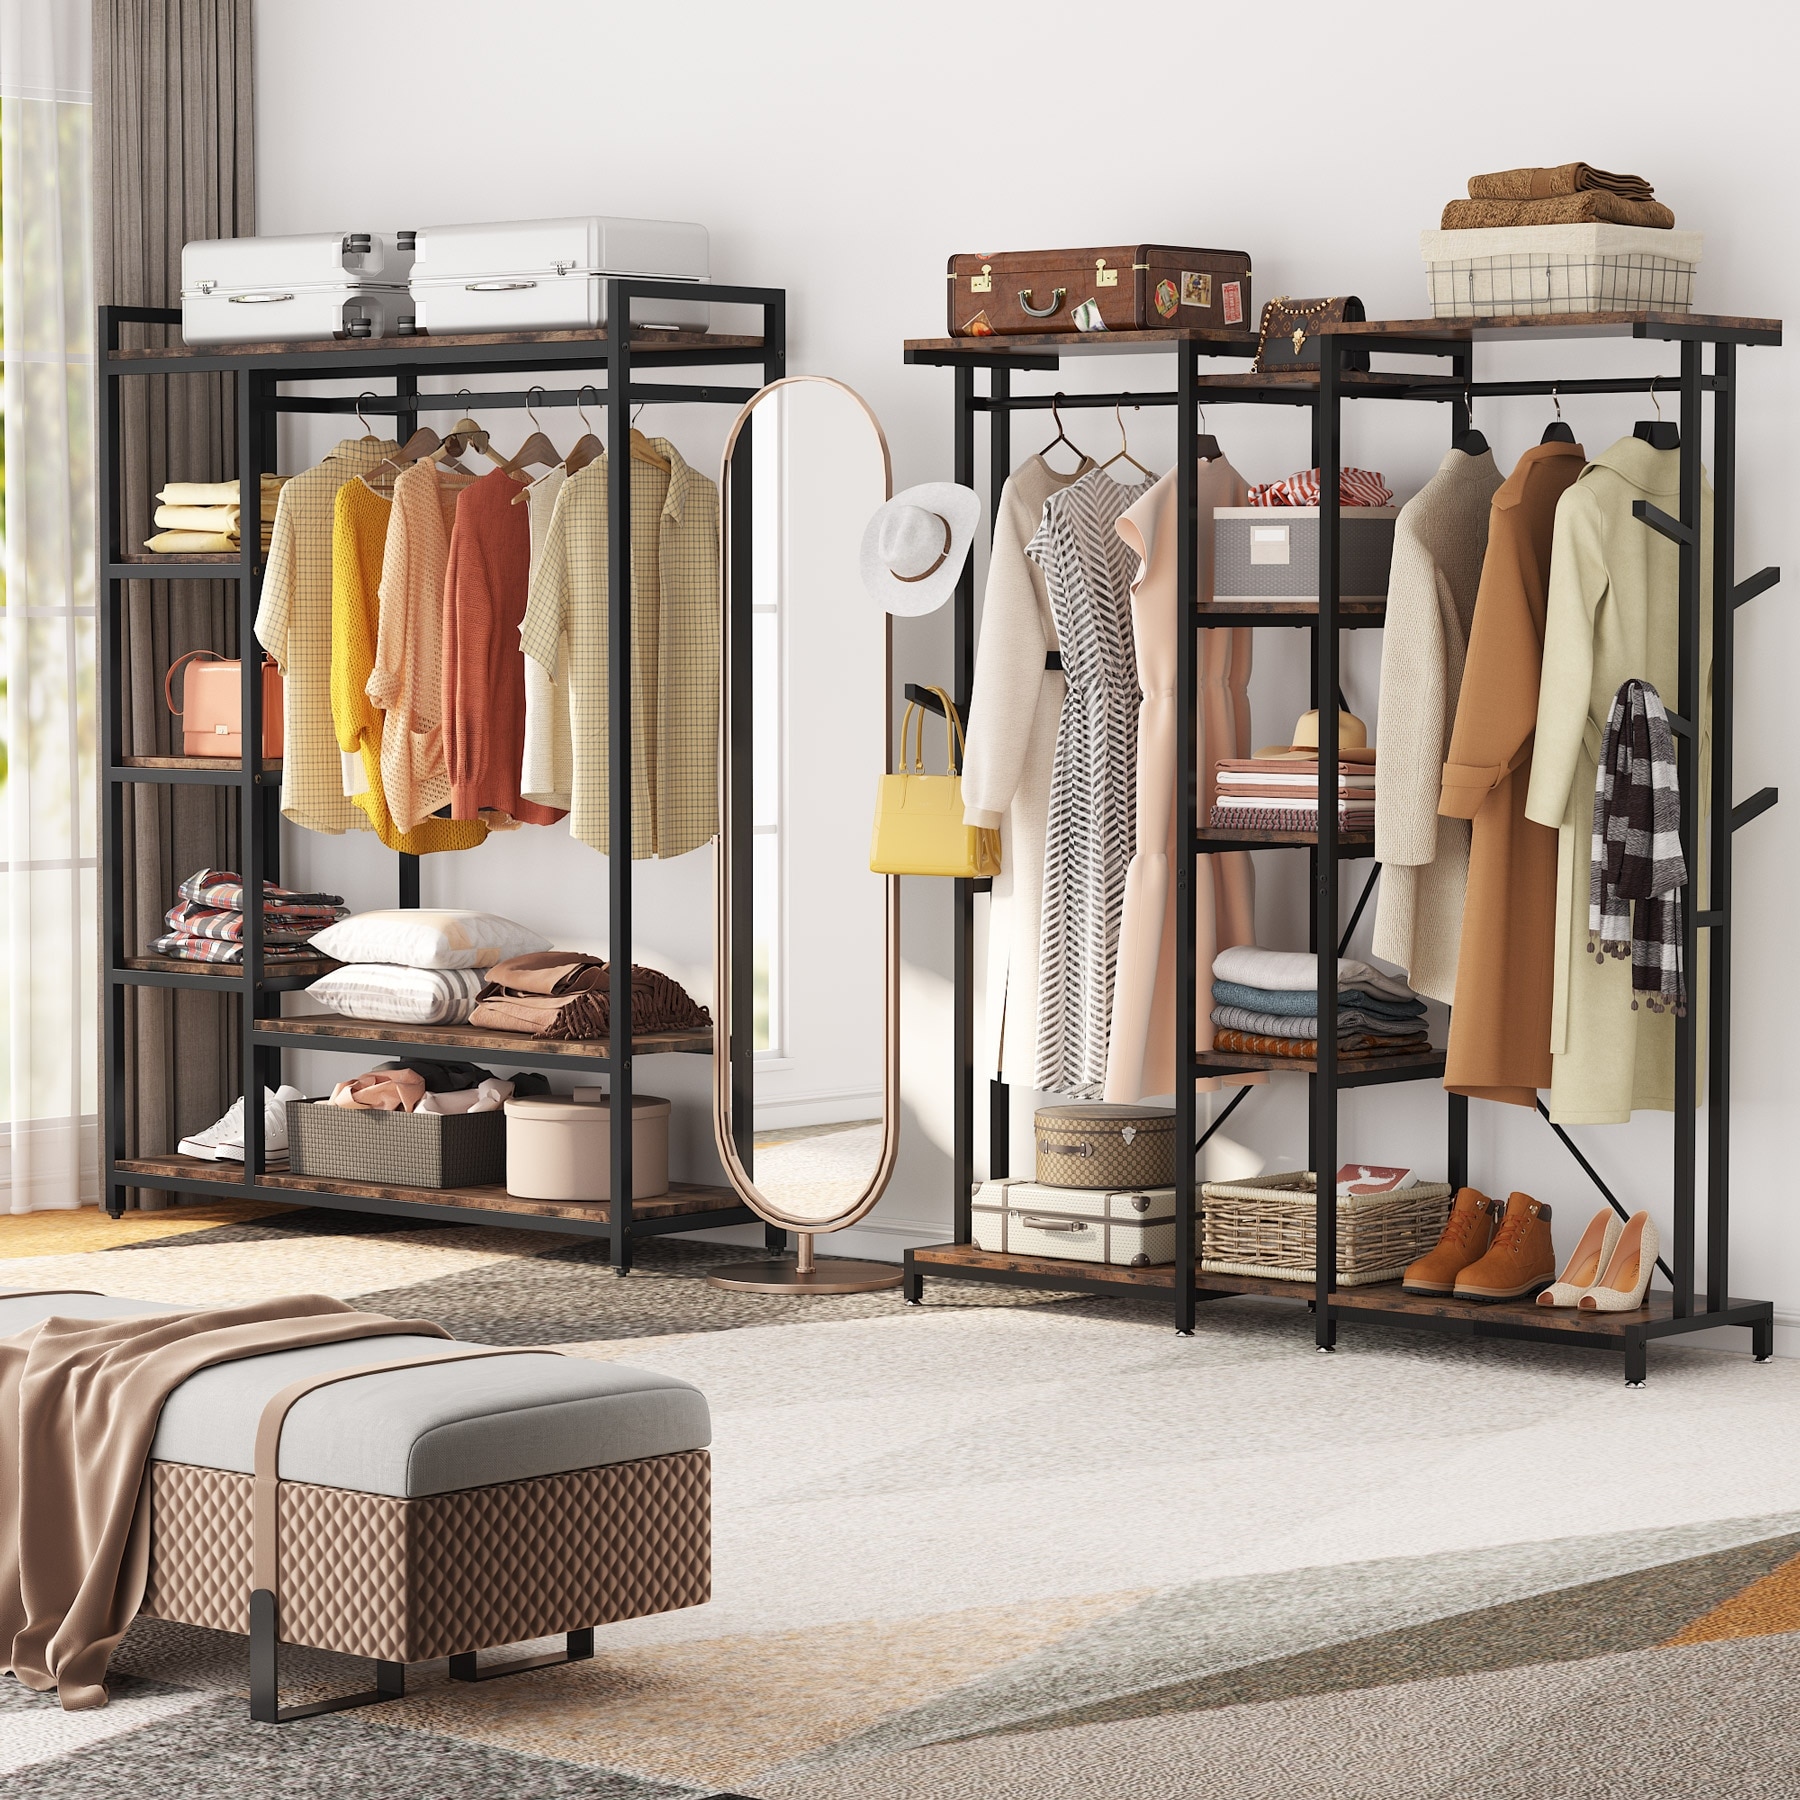 https://ak1.ostkcdn.com/images/products/is/images/direct/1ba07a49456d069ca378327160d3b0e0b3cf86db/Extra-Large-Closet-Organizer-with-Hooks-Clothes-Rack-with-Shelves-and-hanging-Rod.jpg